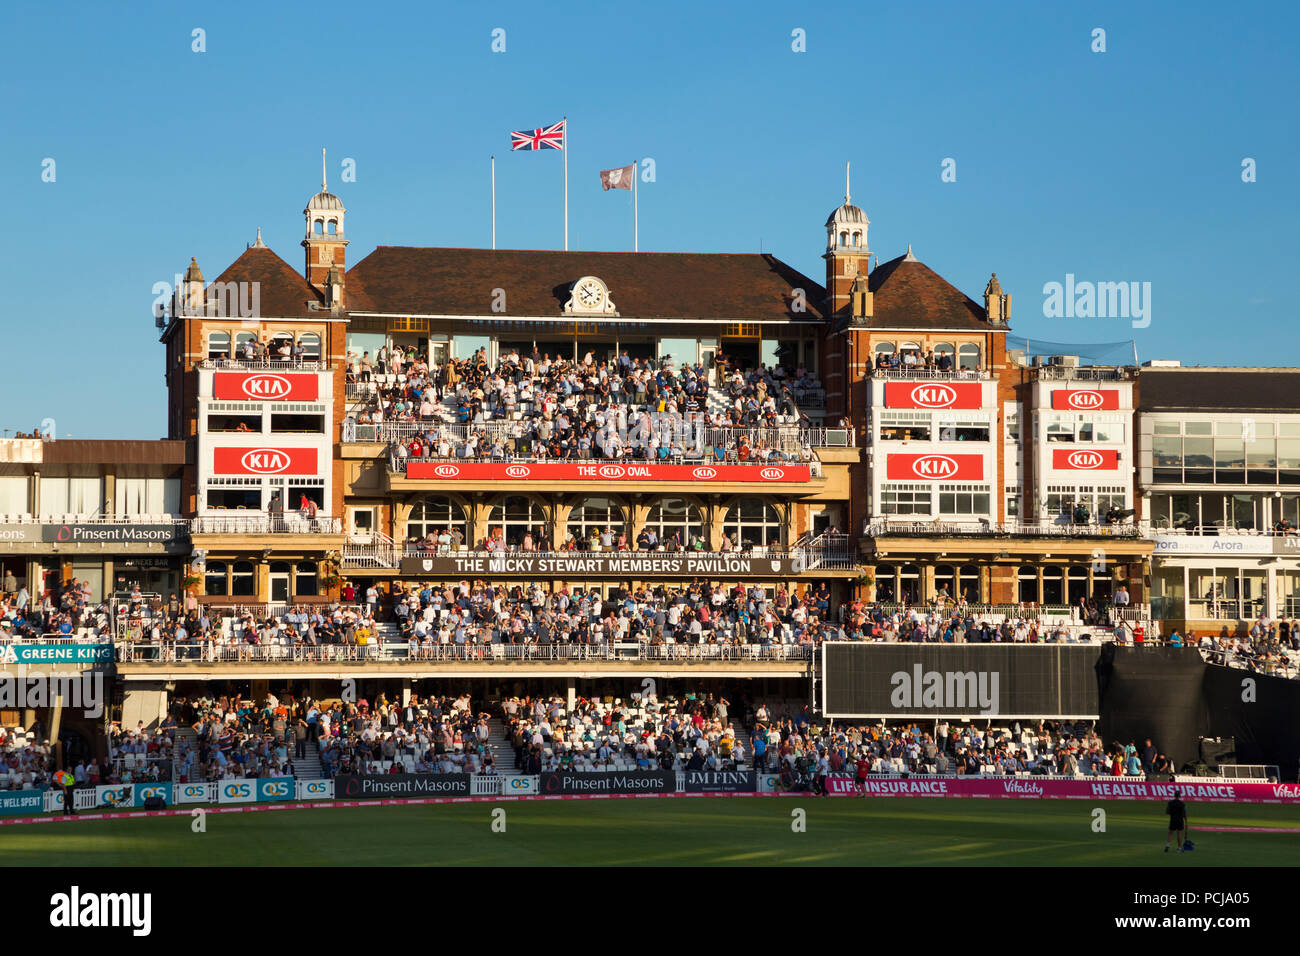 The Micky Stewart Members' Pavilion overlooking 20 20 day night match and the cricket pitch / wicket of The Oval cricket ground (The Kia Oval) Vauxhall, London. UK. (100) Stock Photo